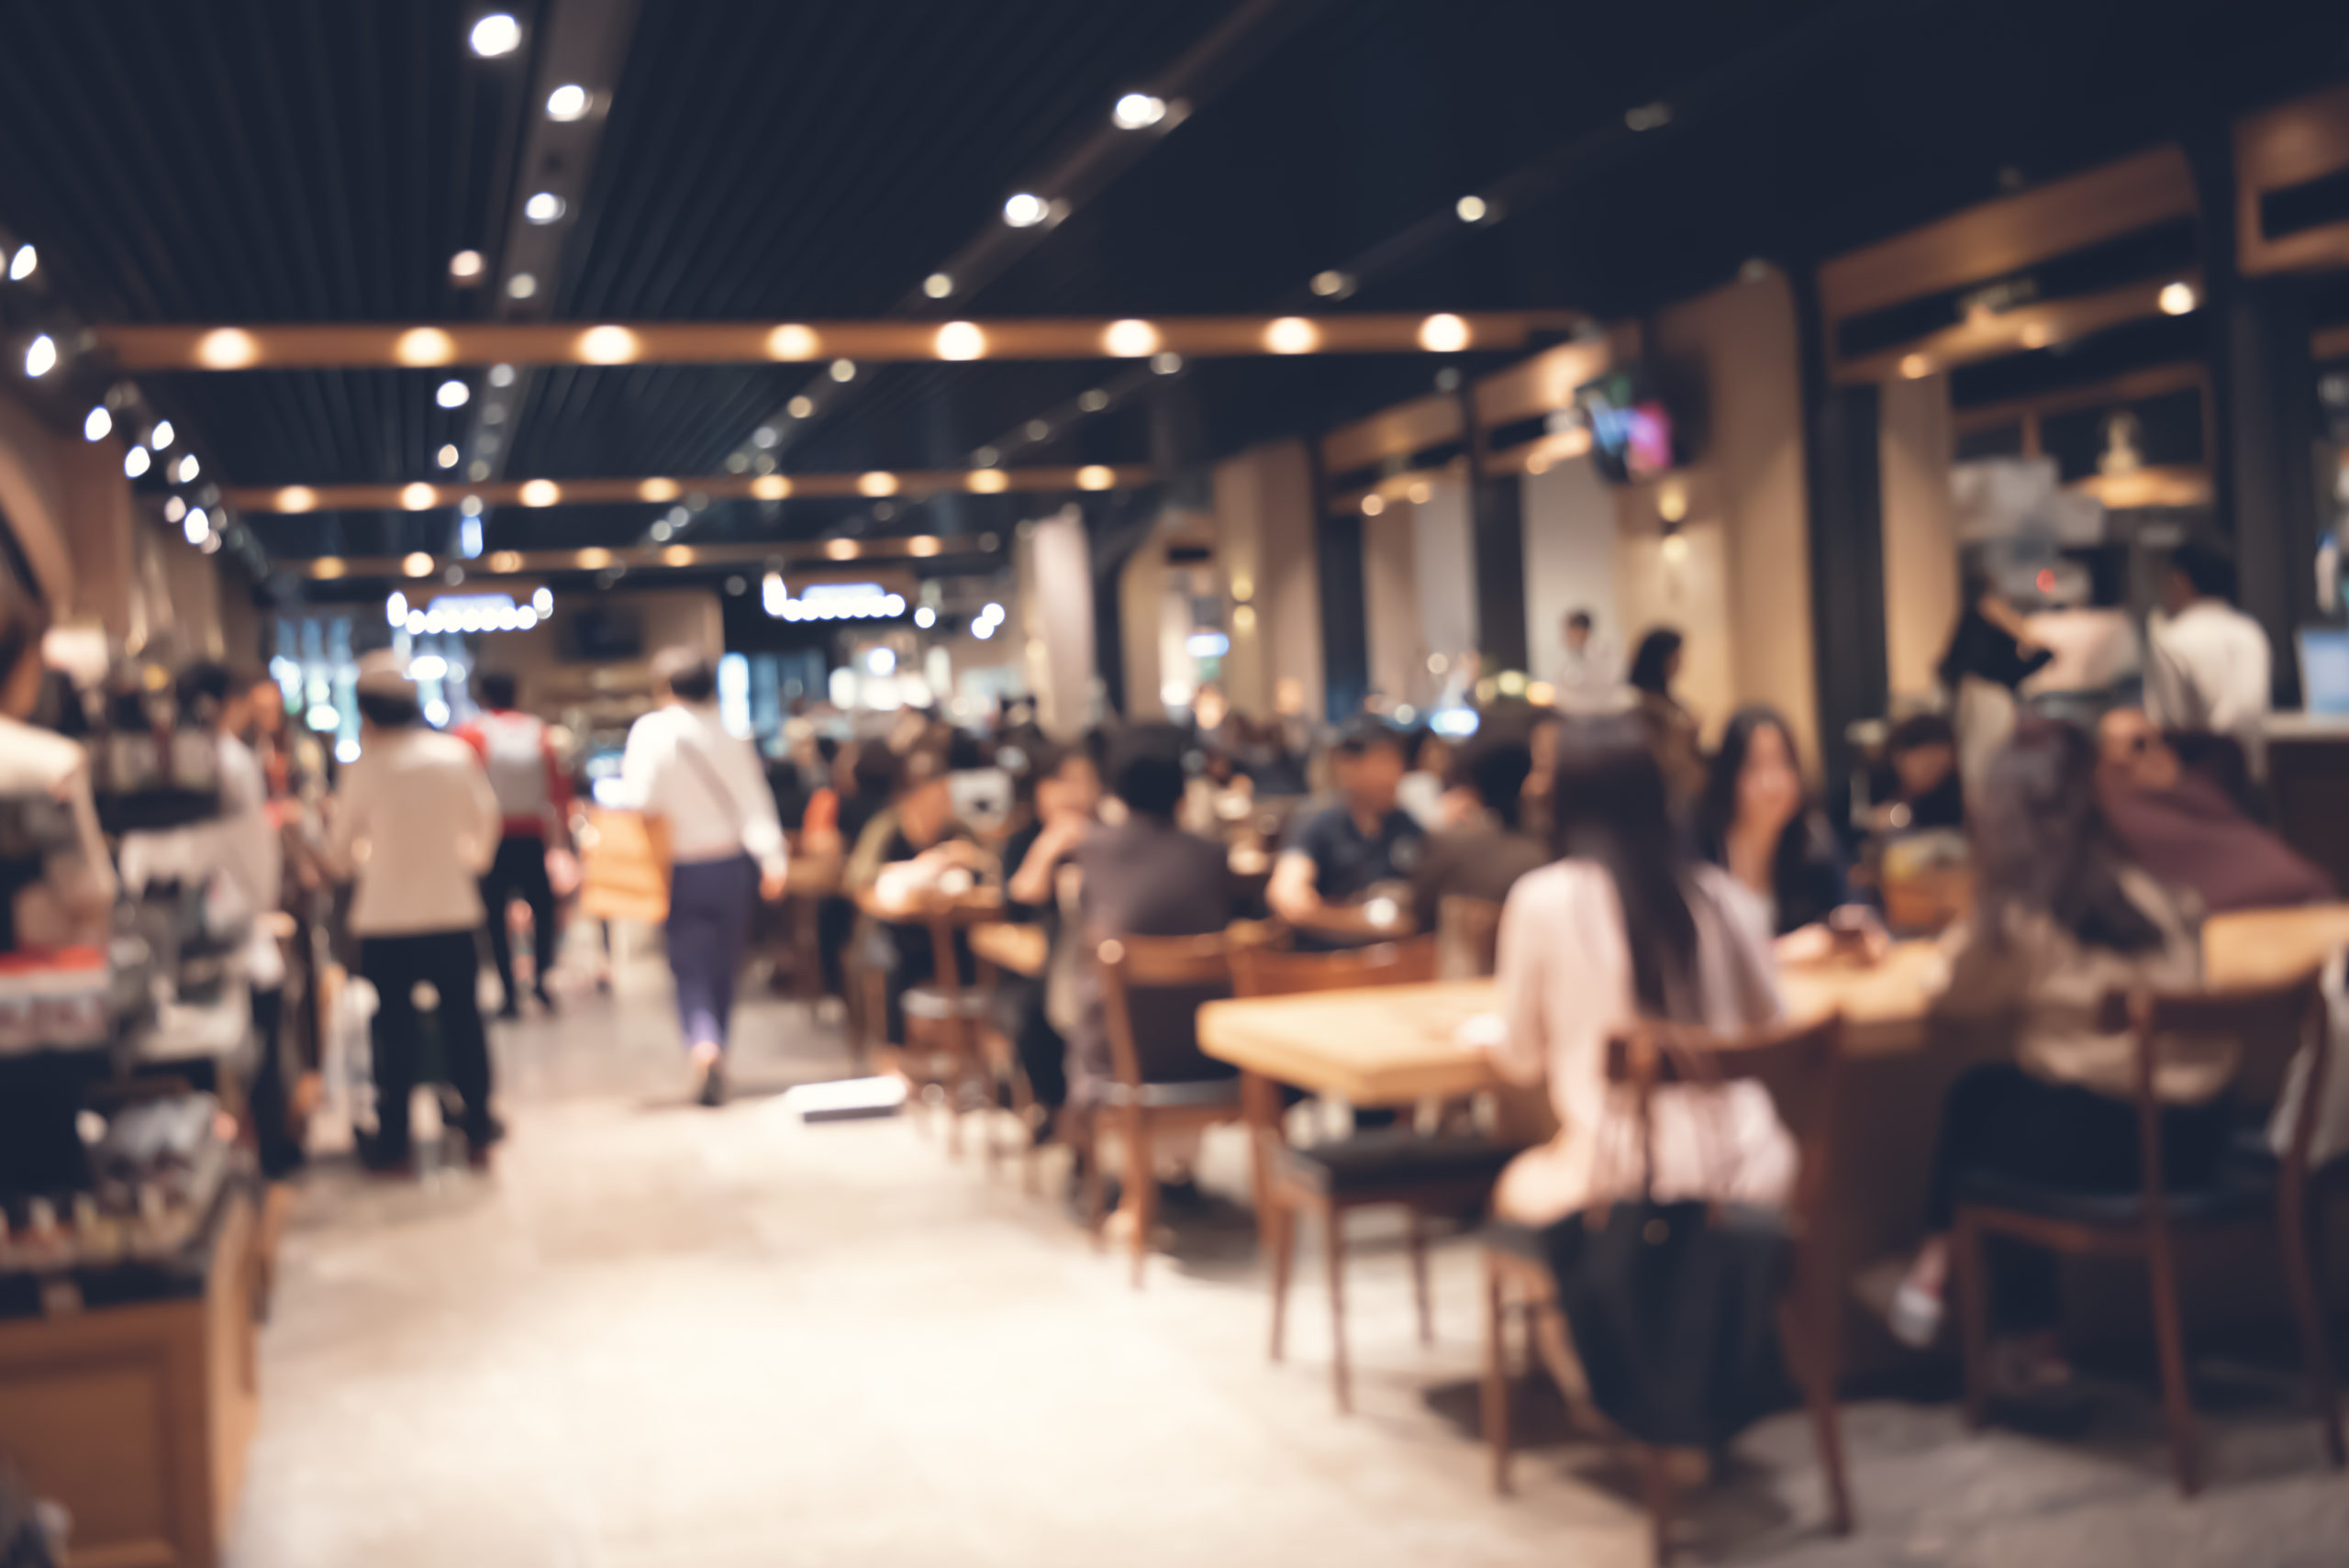 Image description: A stock photo of a cafe with many people sitting at tables and walking around. The image is intentionally blurry.